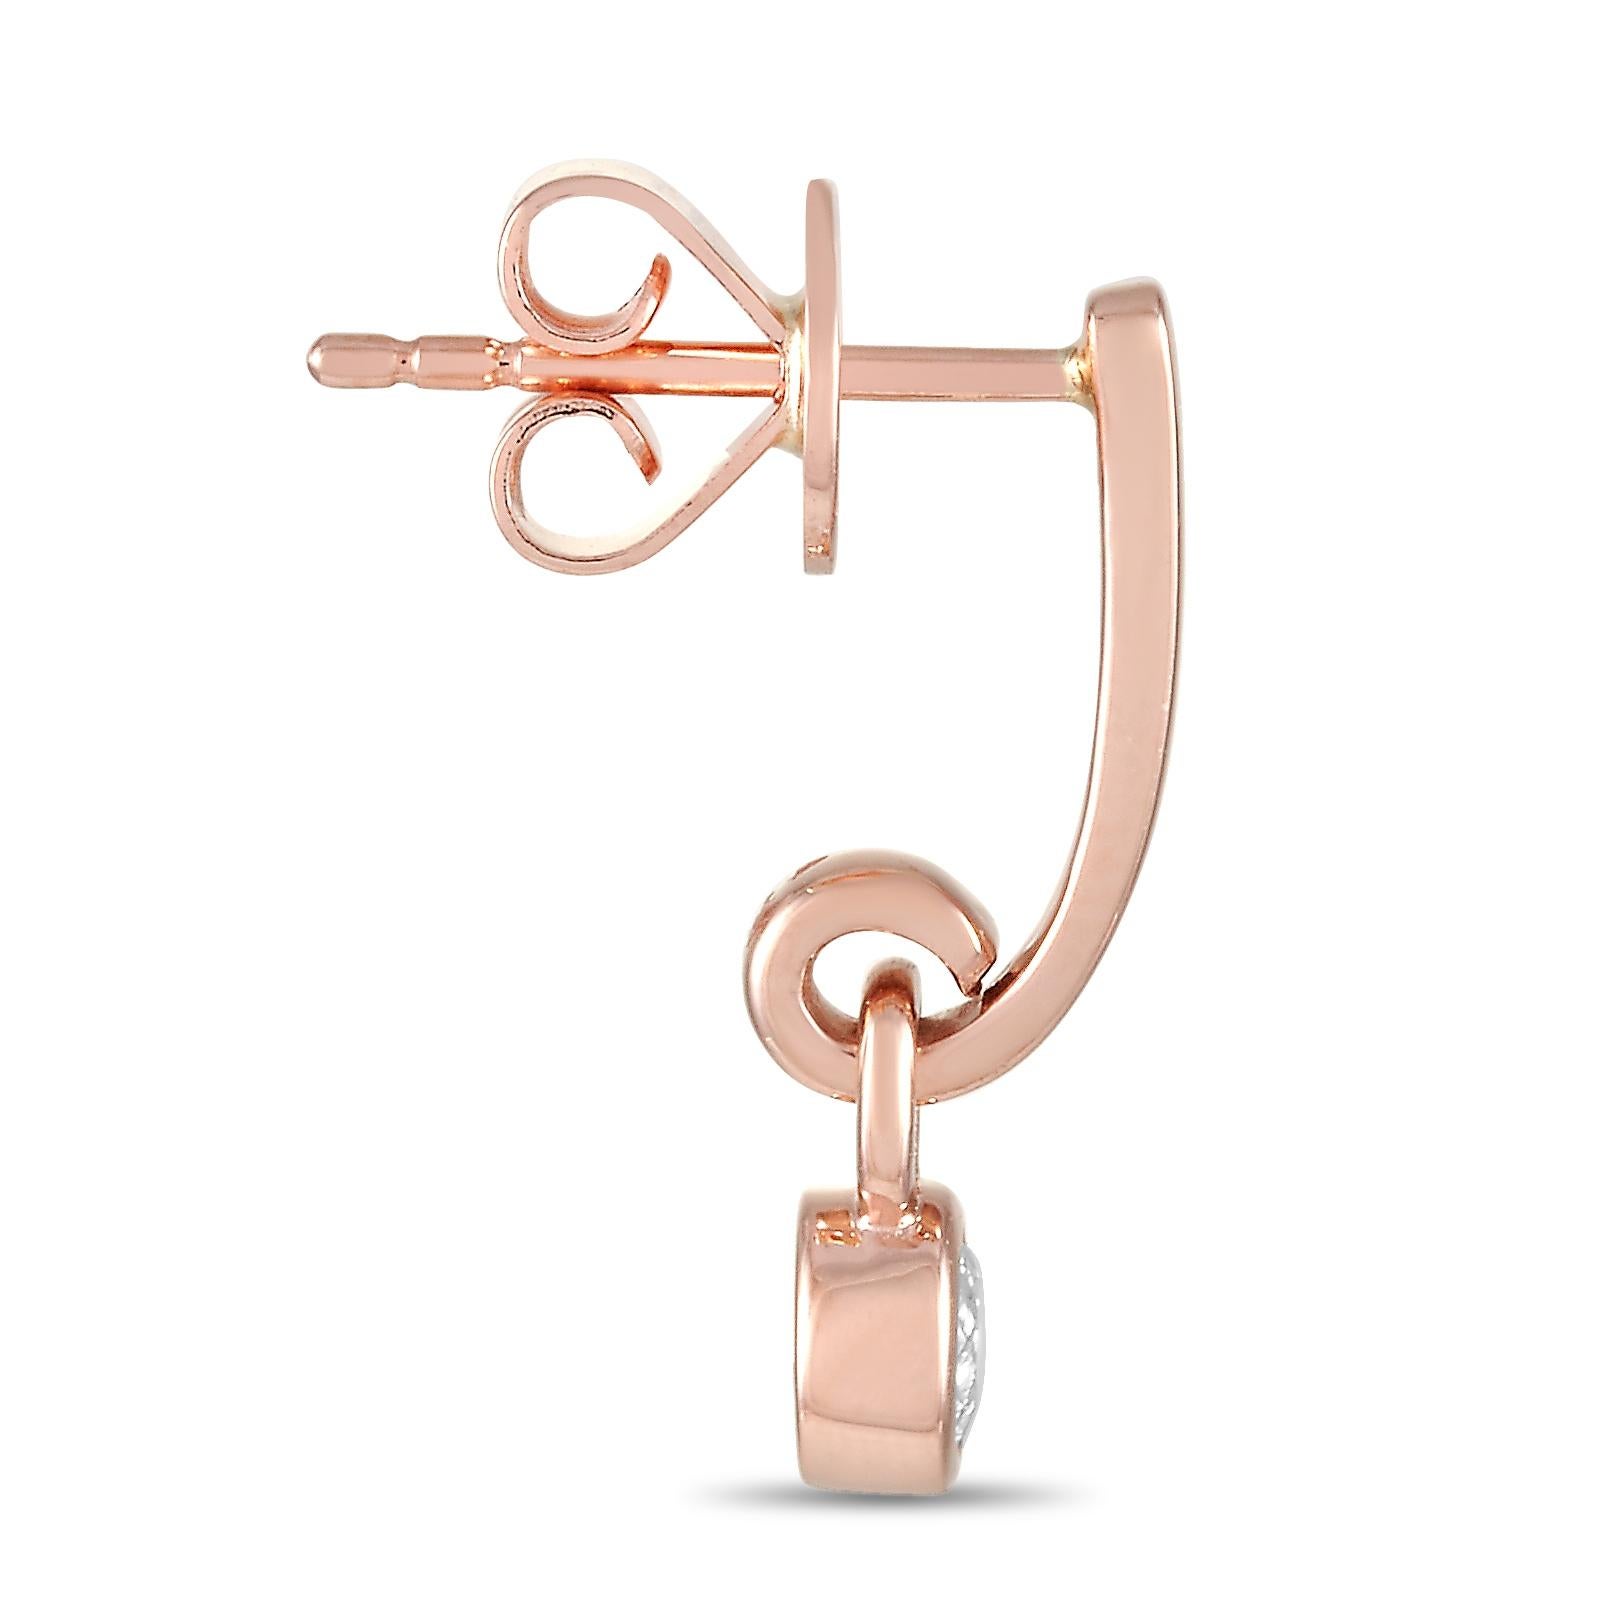 These LB Exclusive earrings are made of 14K rose gold and embellished with diamonds that amount to 0.29 carats. The earrings measure 0.63” in length and 0.13” in width and each of the two weighs 1.15 grams.
 
 The pair is offered in brand new